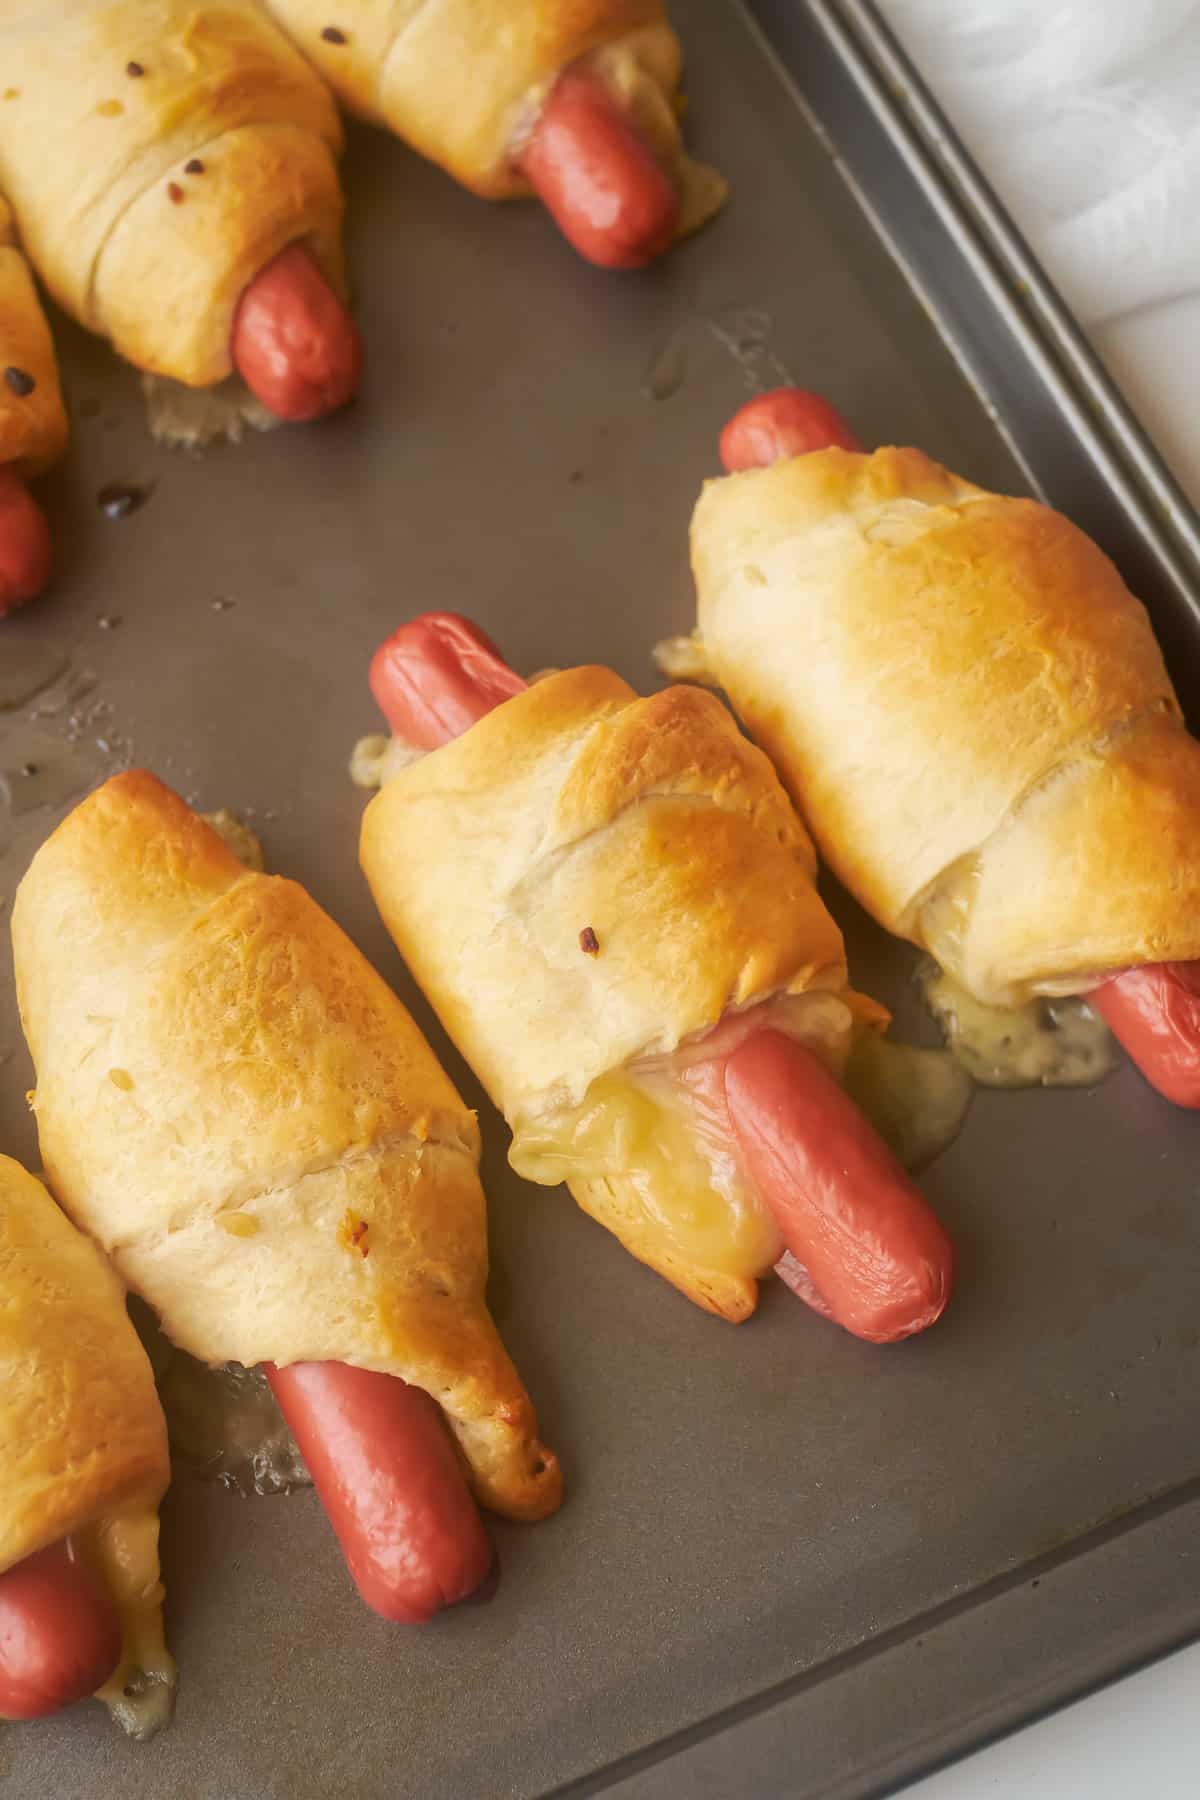 Rows of hot dogs wrapped in crescent rolls.